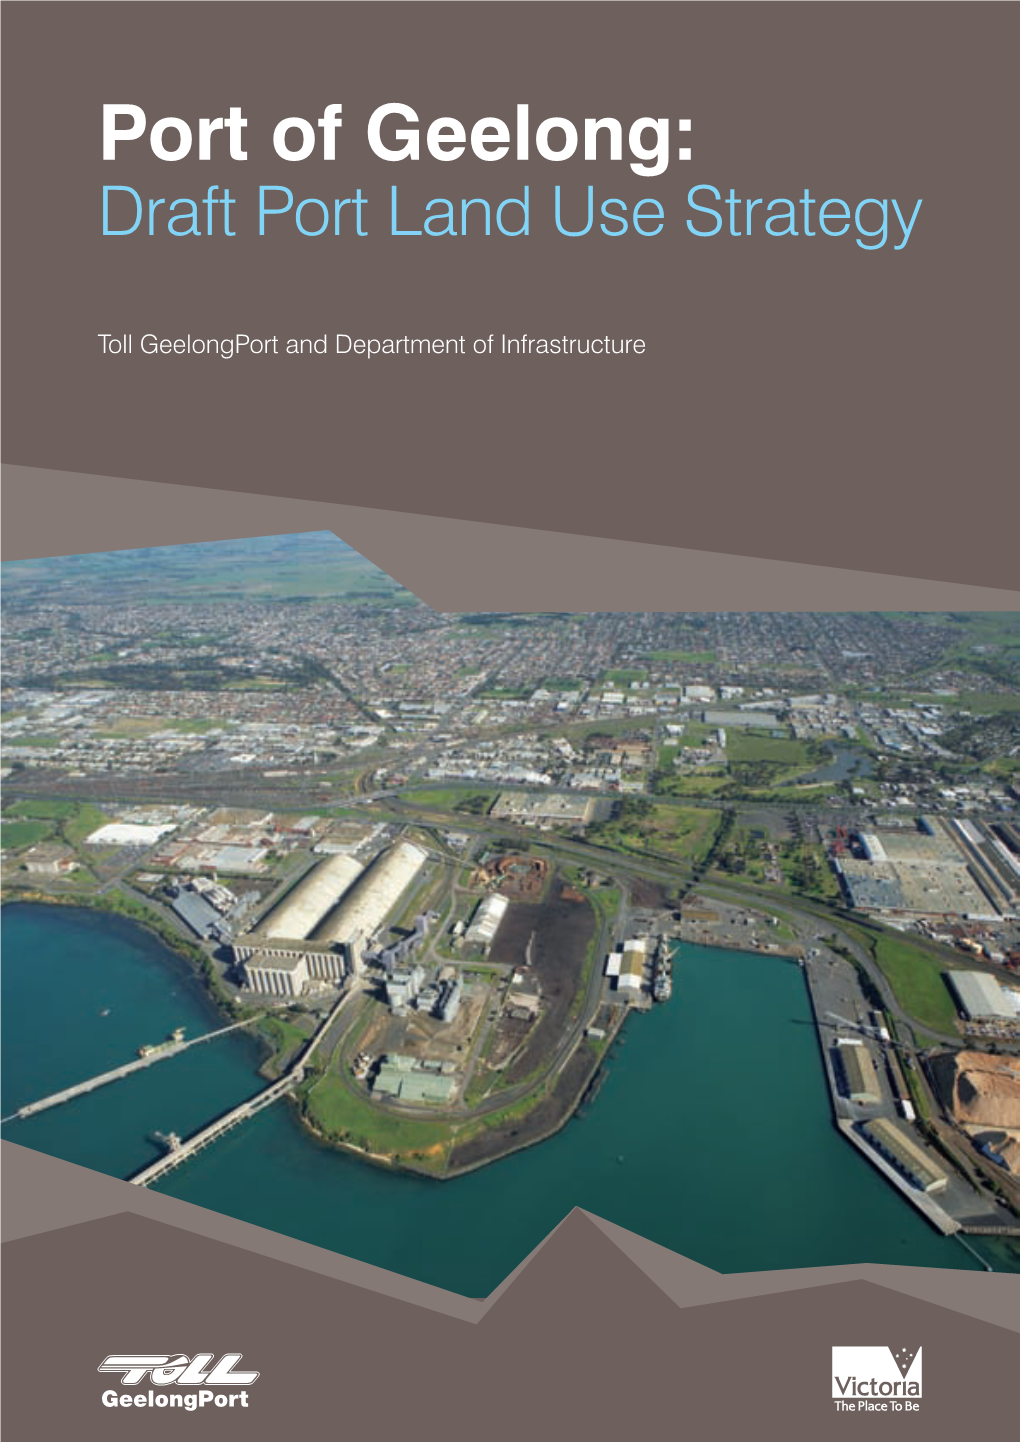 Port of Geelong Draft Port Land Use Strategy